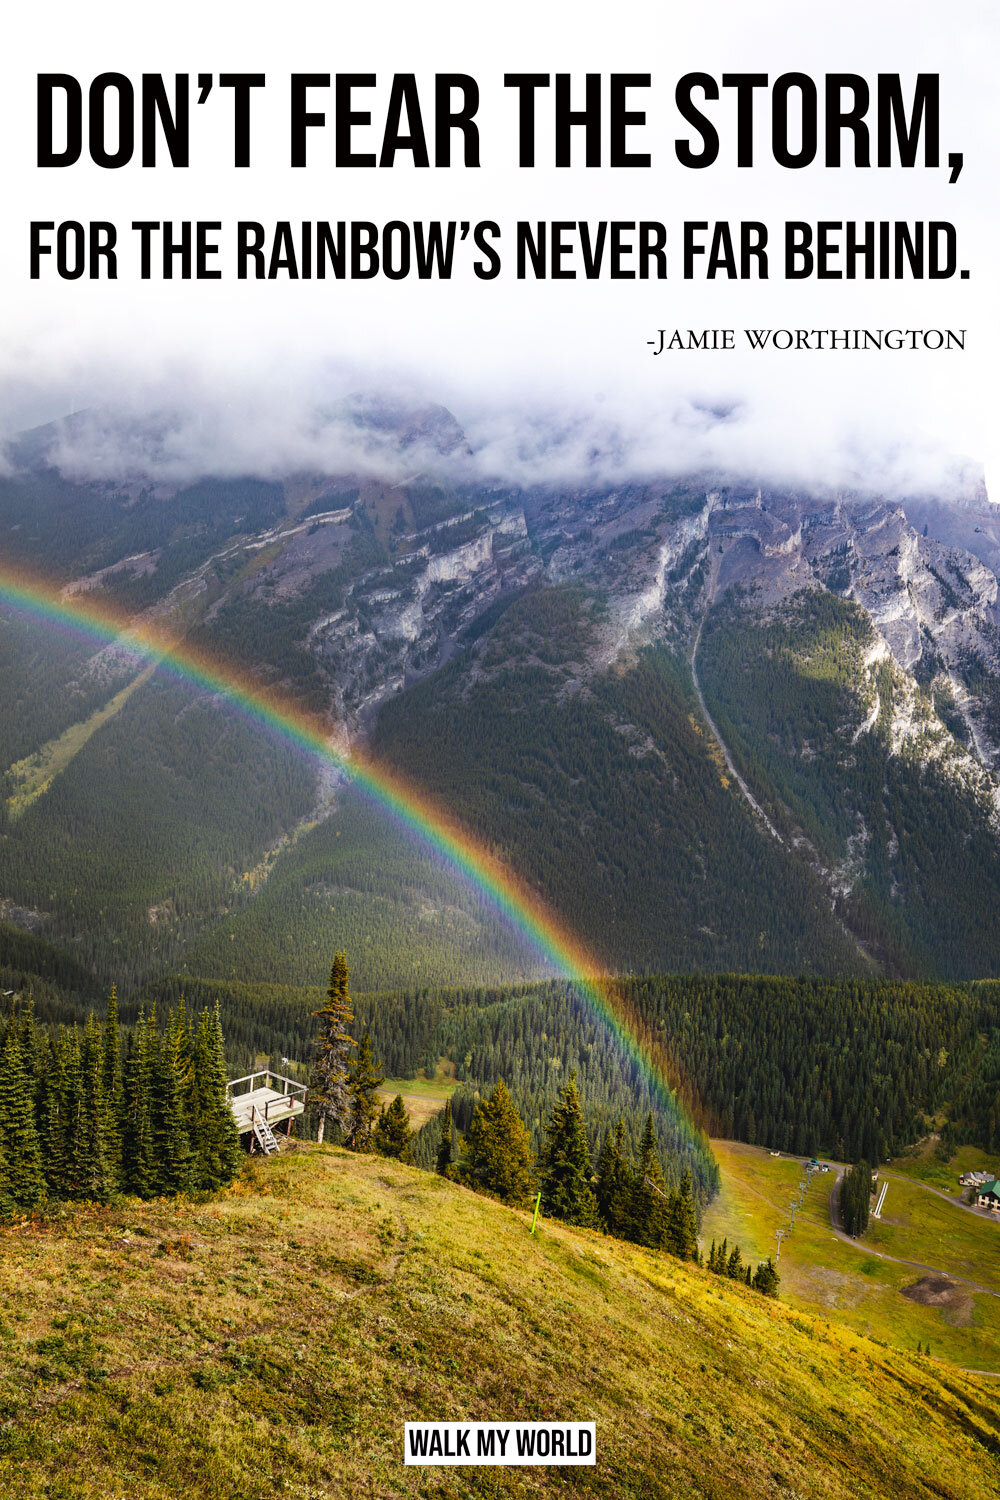 The Ultimate Collection of Over 999 Rainbow Quotes Images in Full 4K Quality